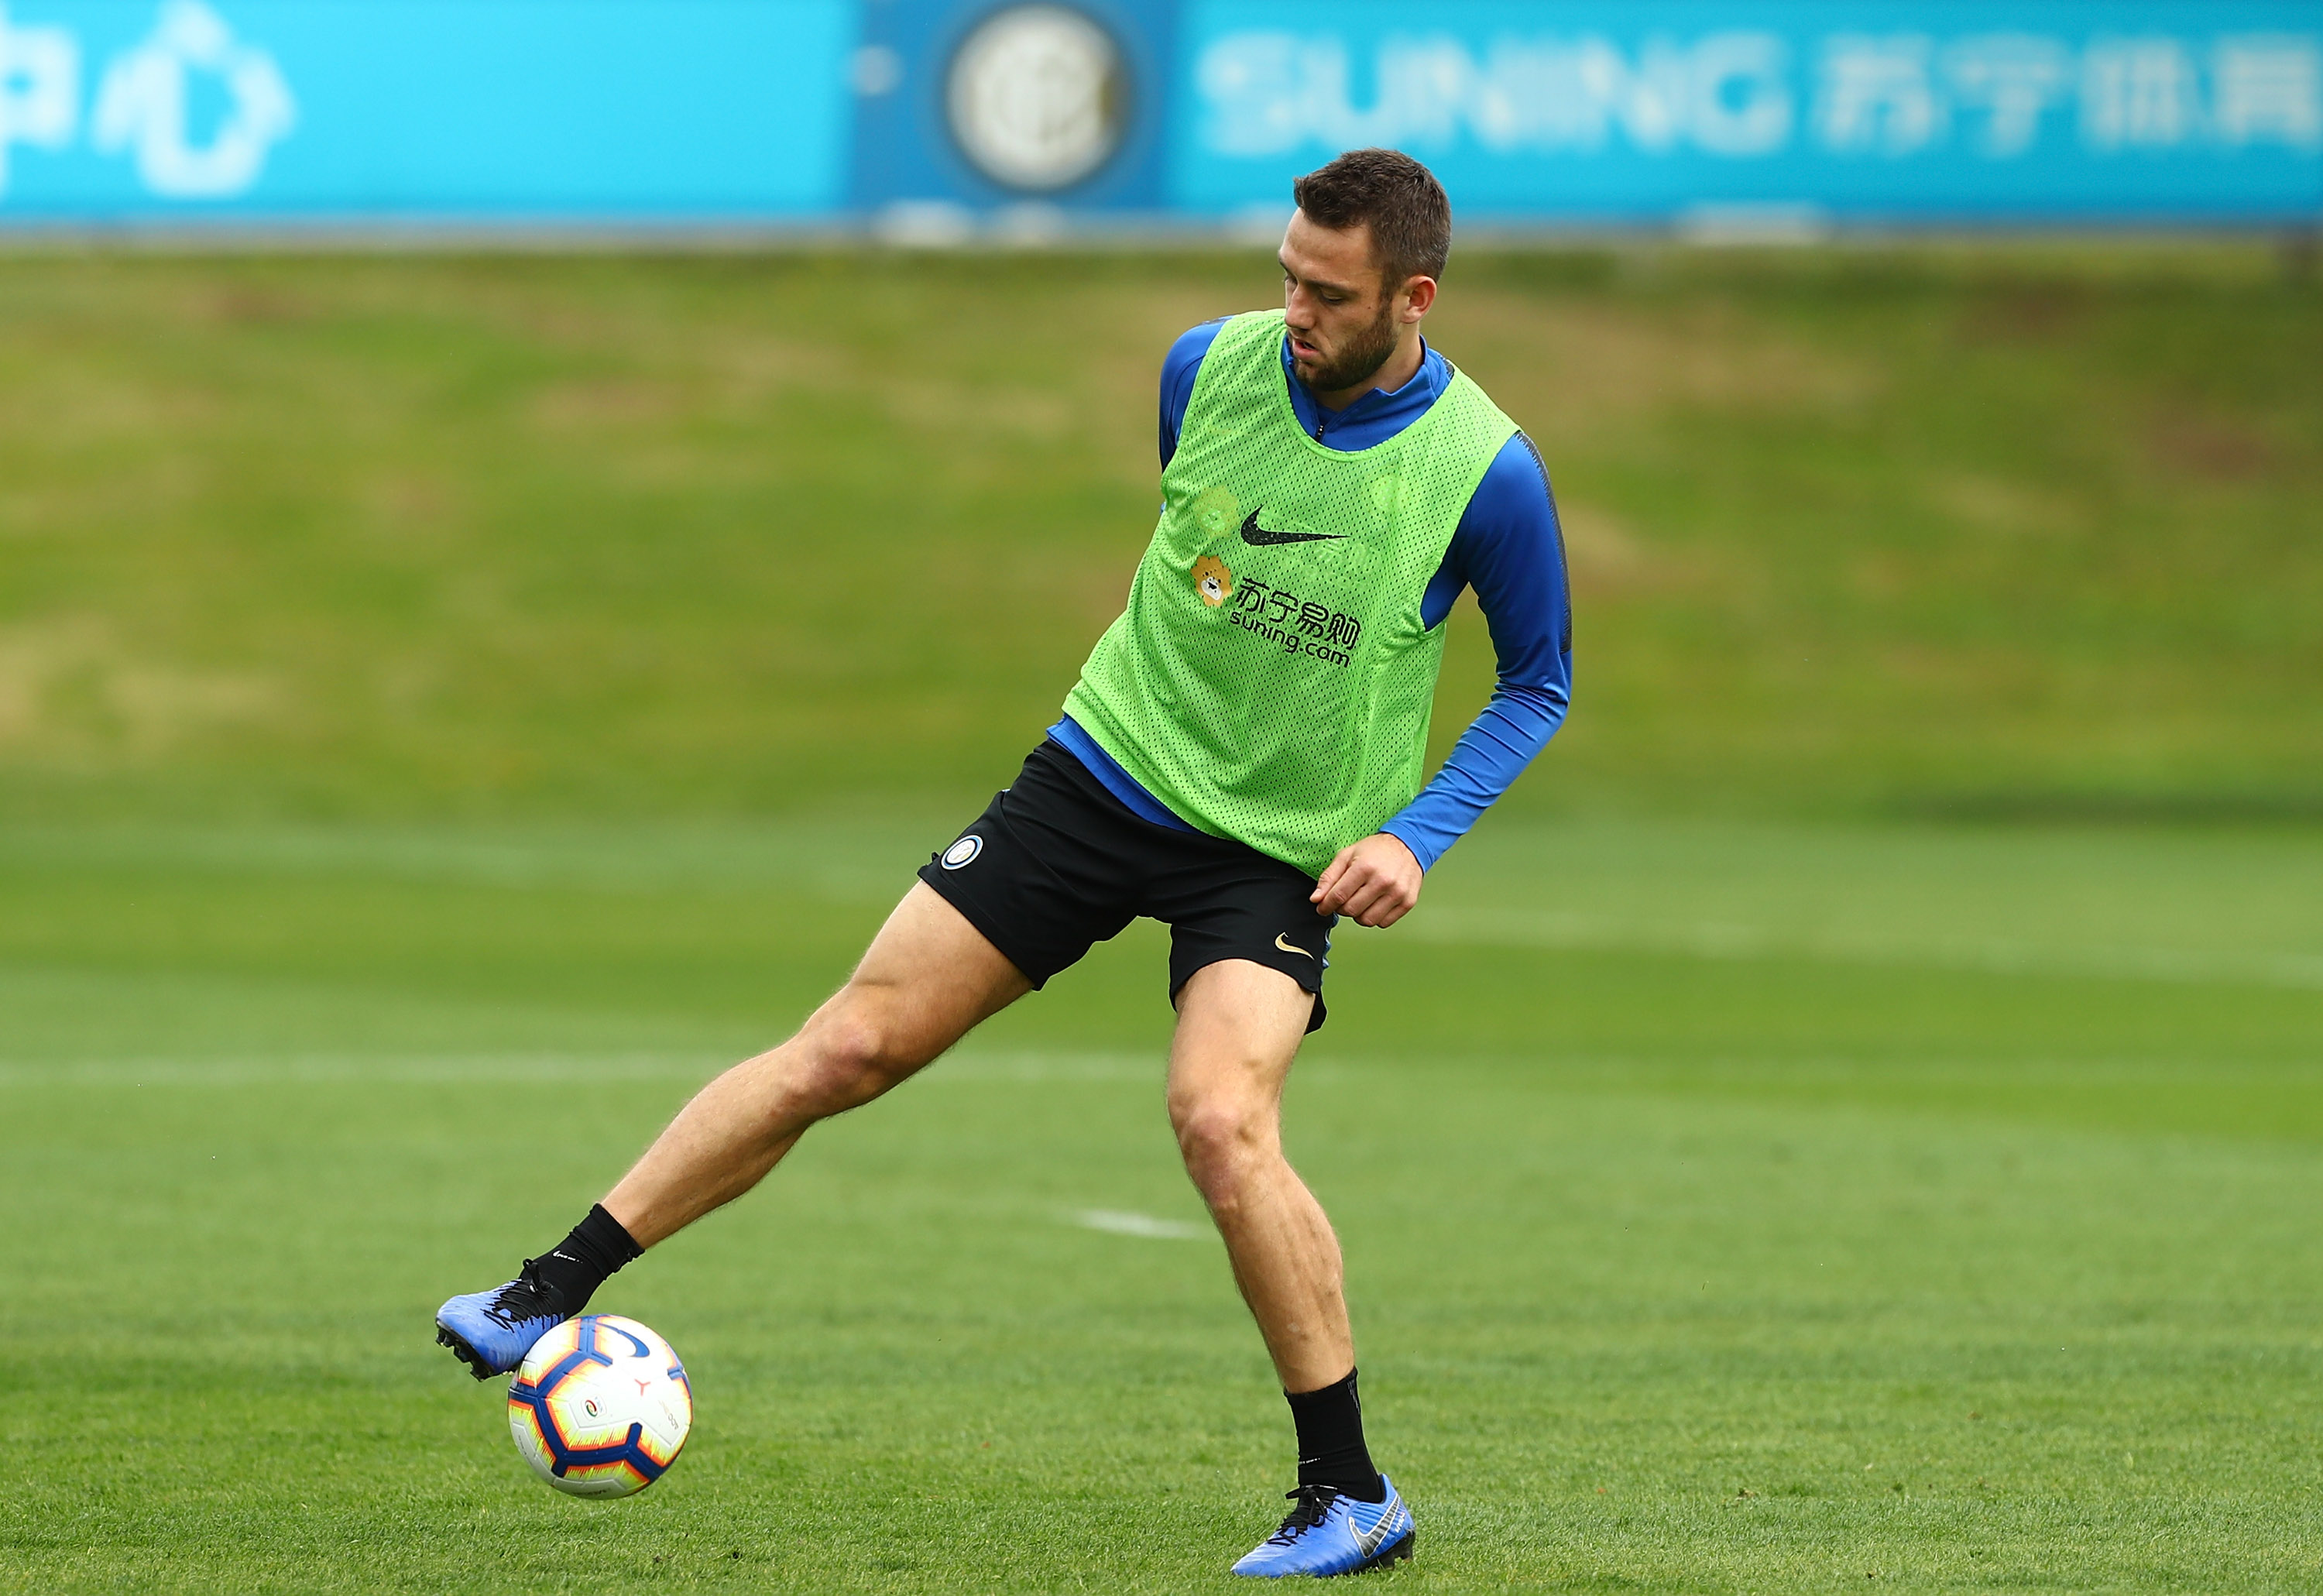 COMO, ITALY - APRIL 12:  Stefan De Vrij of FC Internazionale in action during the FC Internazionale training session at the club's training ground Suning Training Center in memory of Angelo Moratti on April 12, 2019 in Como, Italy.  (Photo by Marco Luzzani - Inter/Inter via Getty Images)